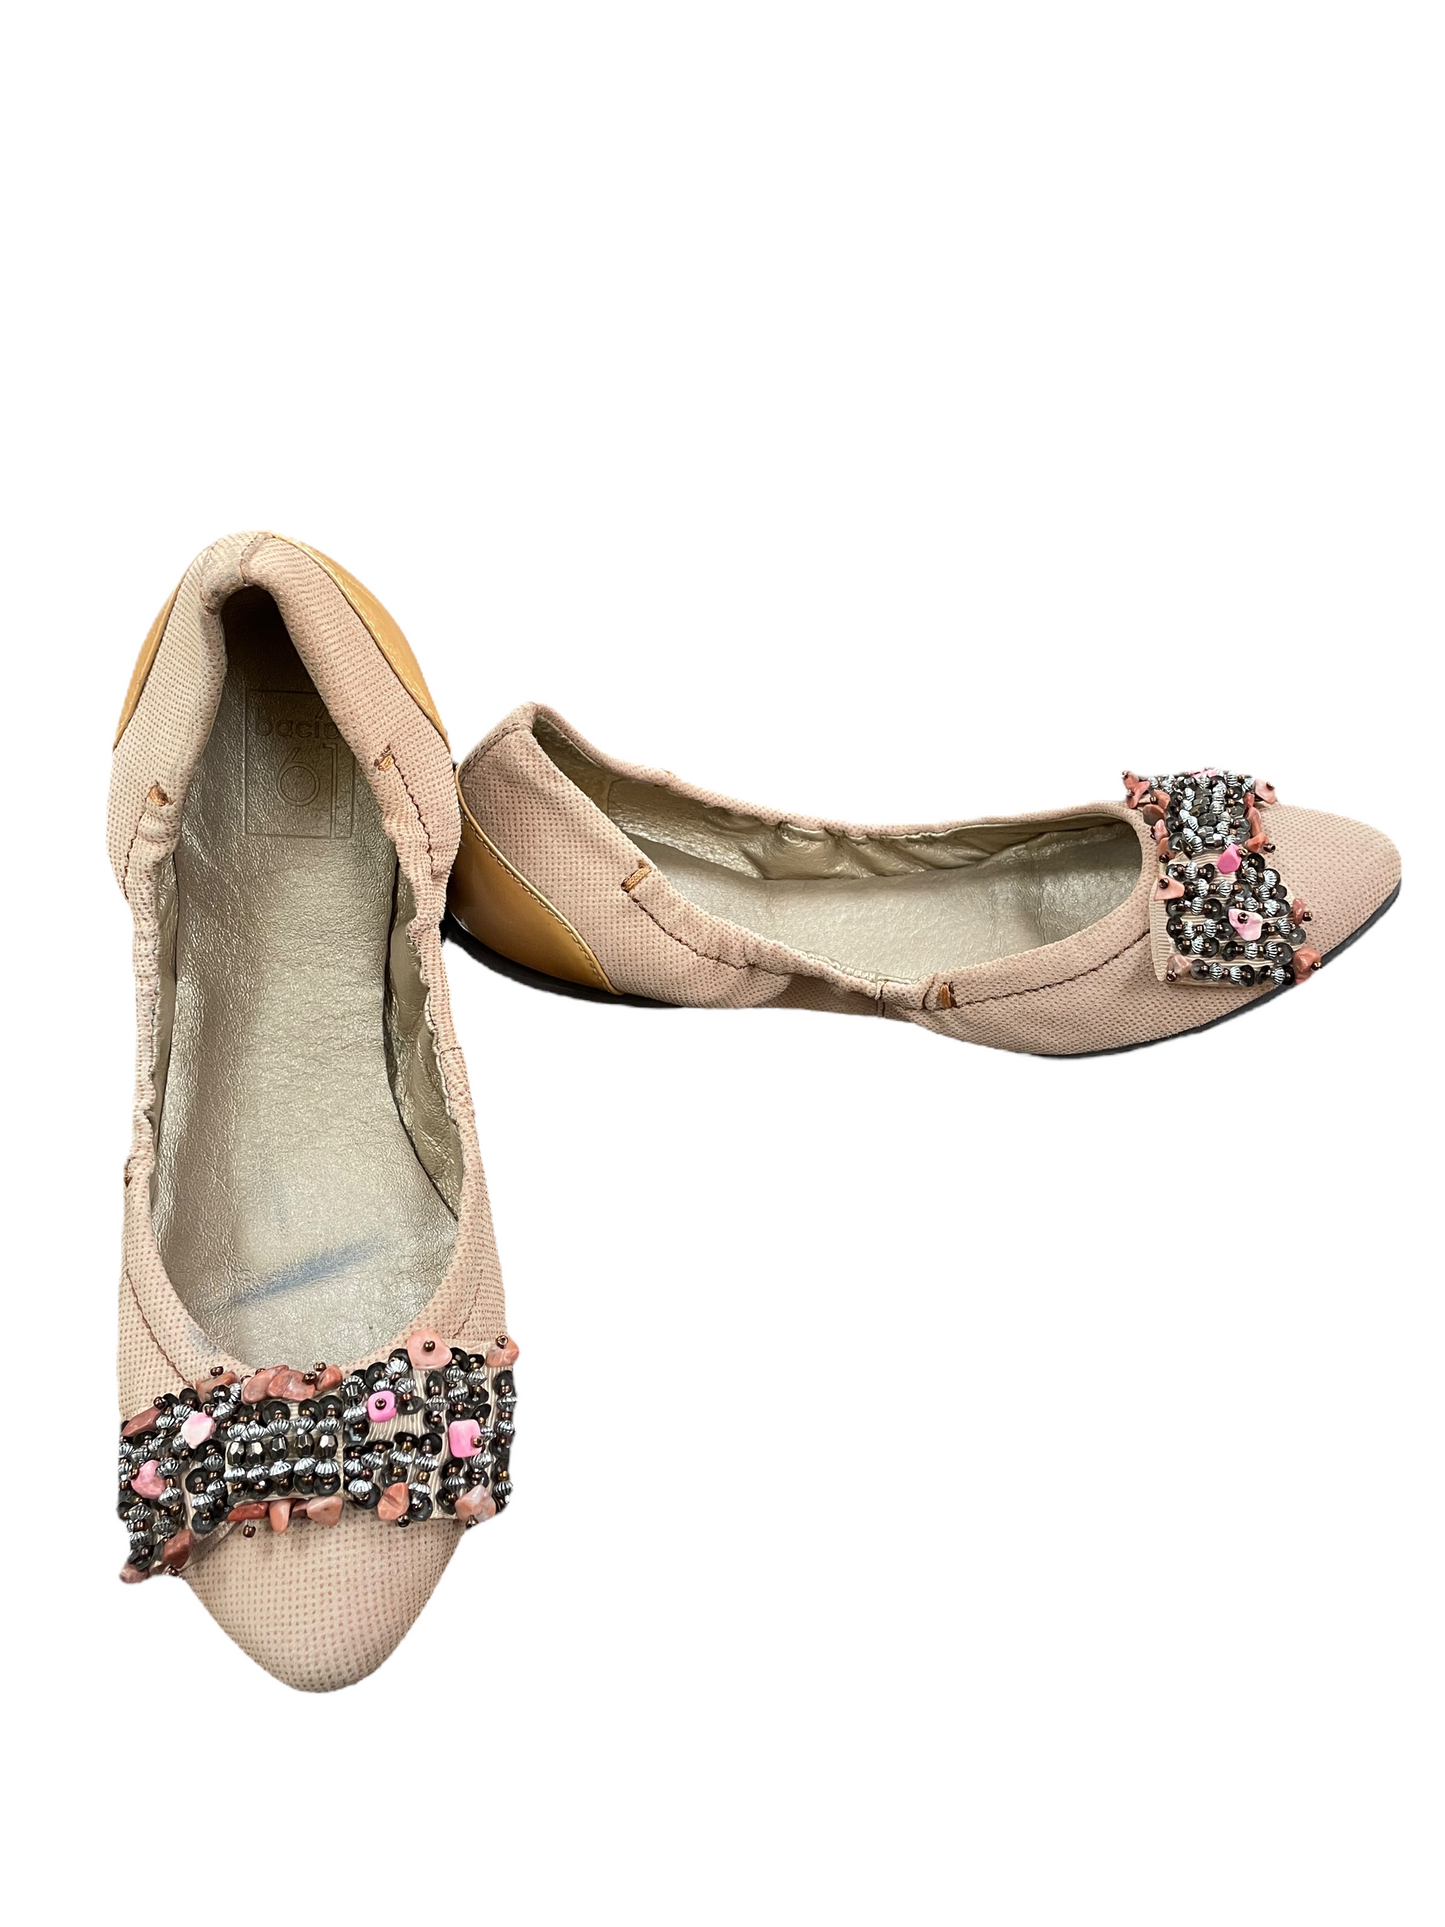 Shoes Flats Ballet By Bacio  Size: 7.5